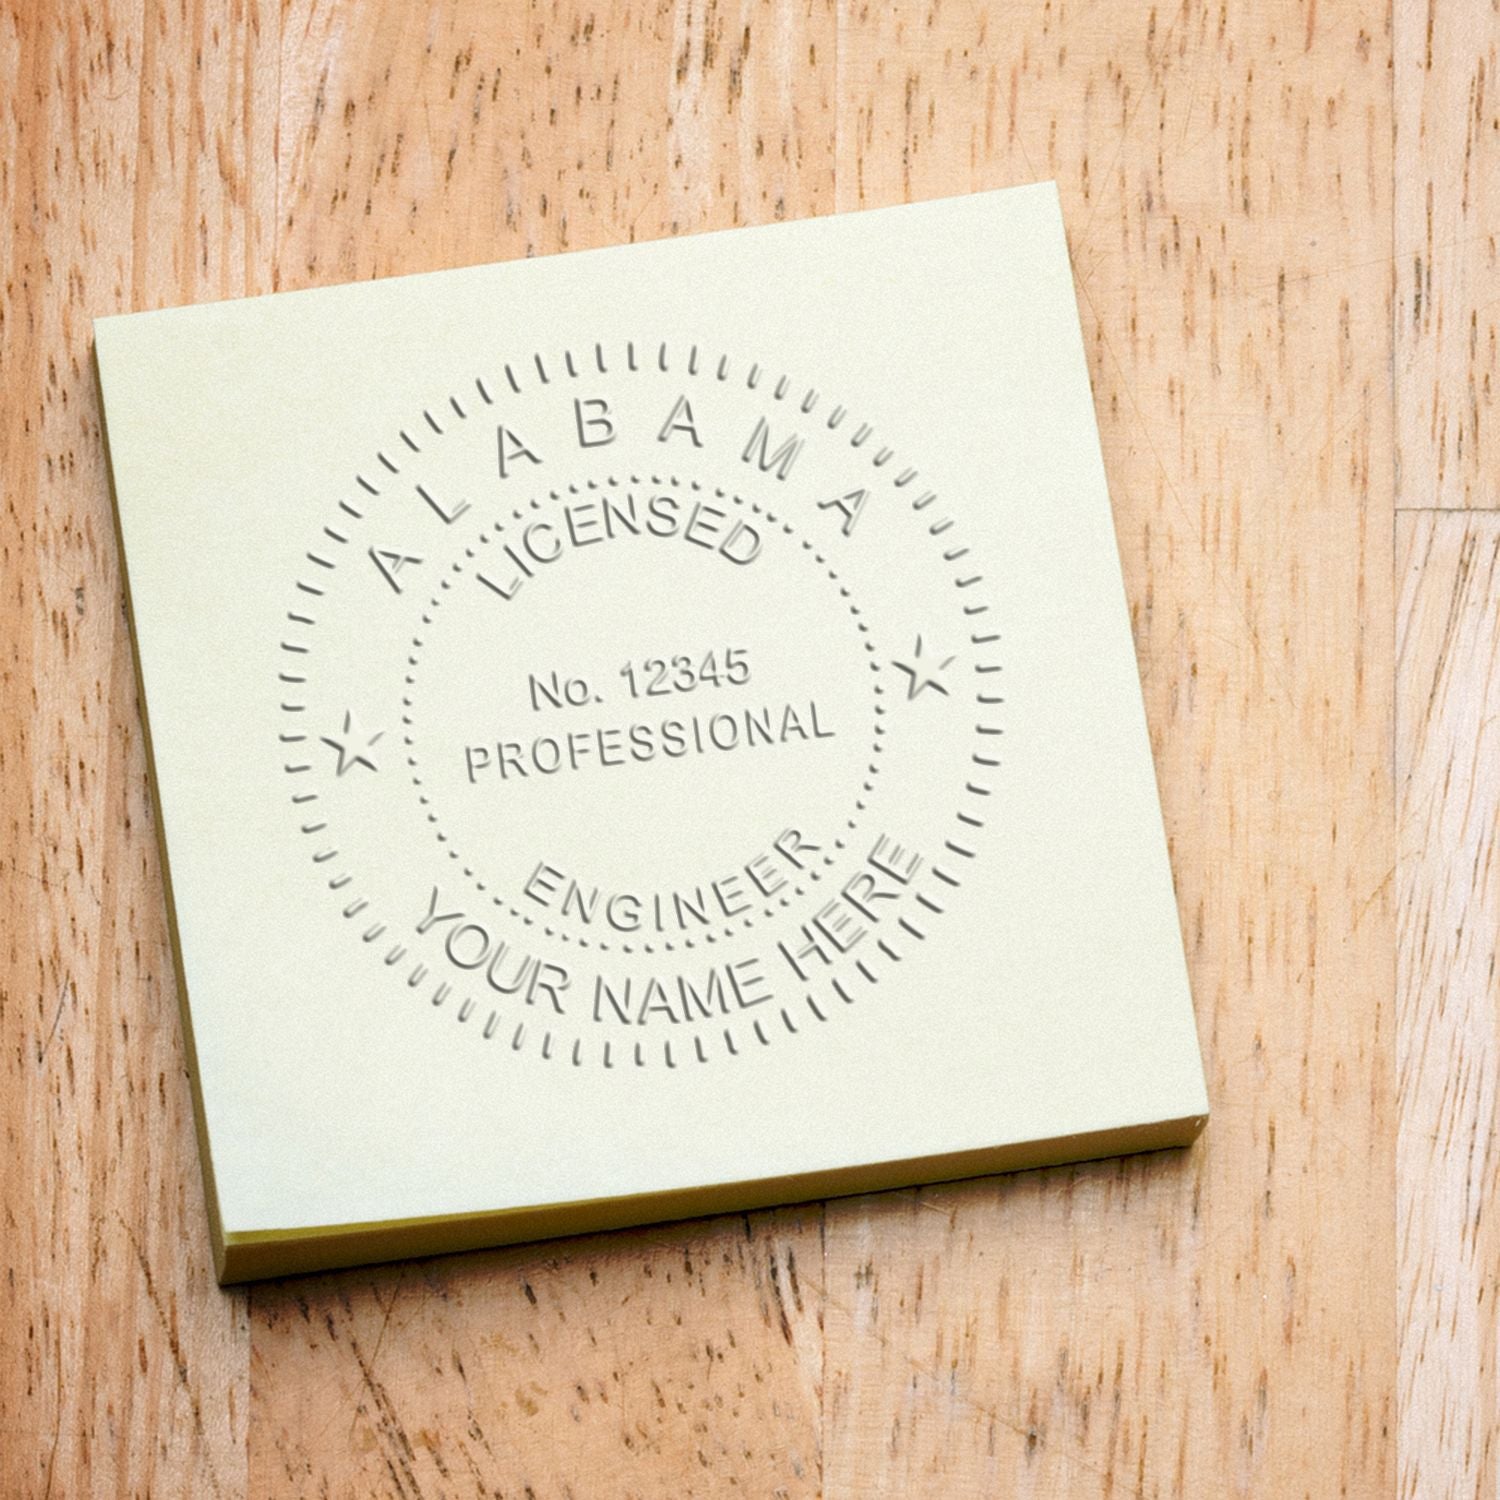 This paper is stamped with a sample imprint of the Alabama Engineer Desk Seal, signifying its quality and reliability.